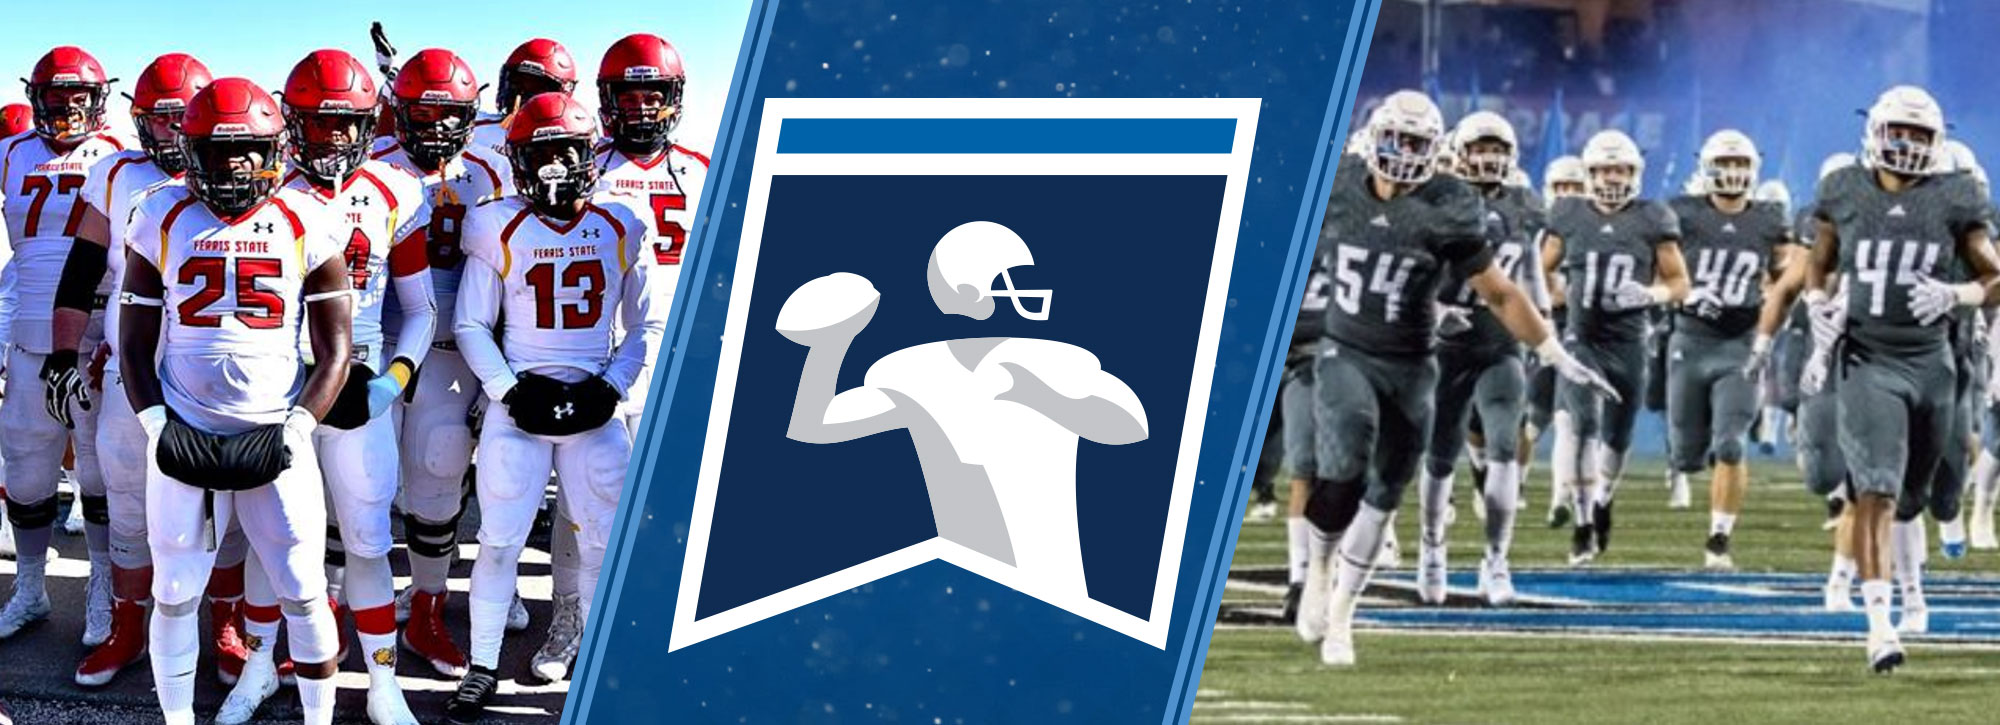 Ferris State & Grand Valley State Earn 2018 NCAA Football Championship Berths